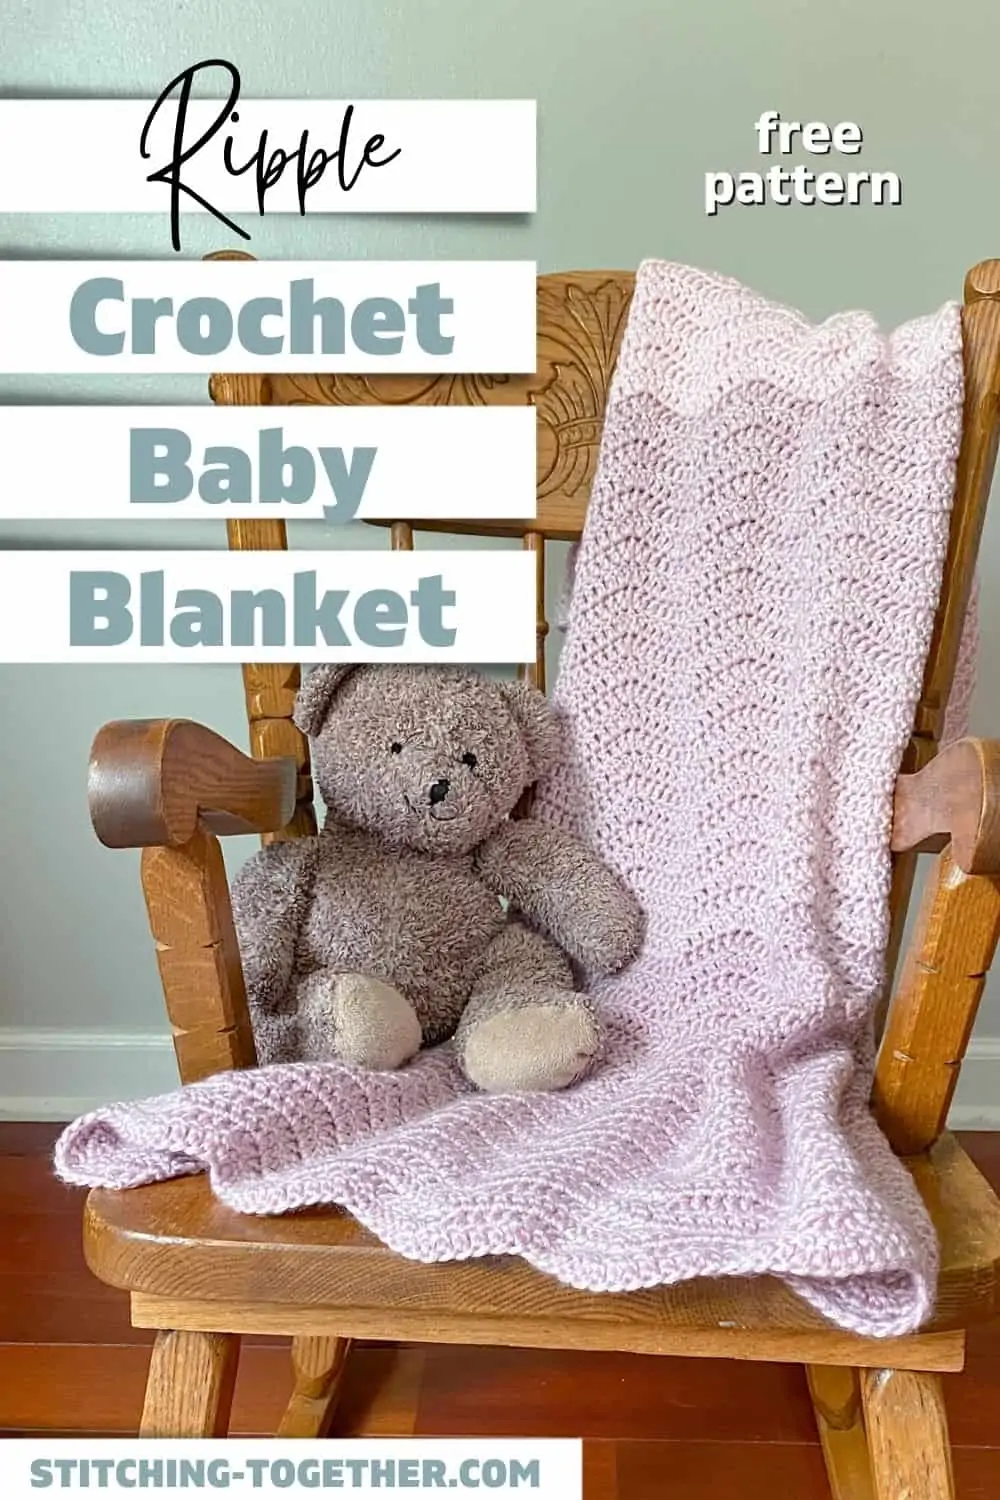 pin of ripple baby afghan on a chair with a stuffed bear